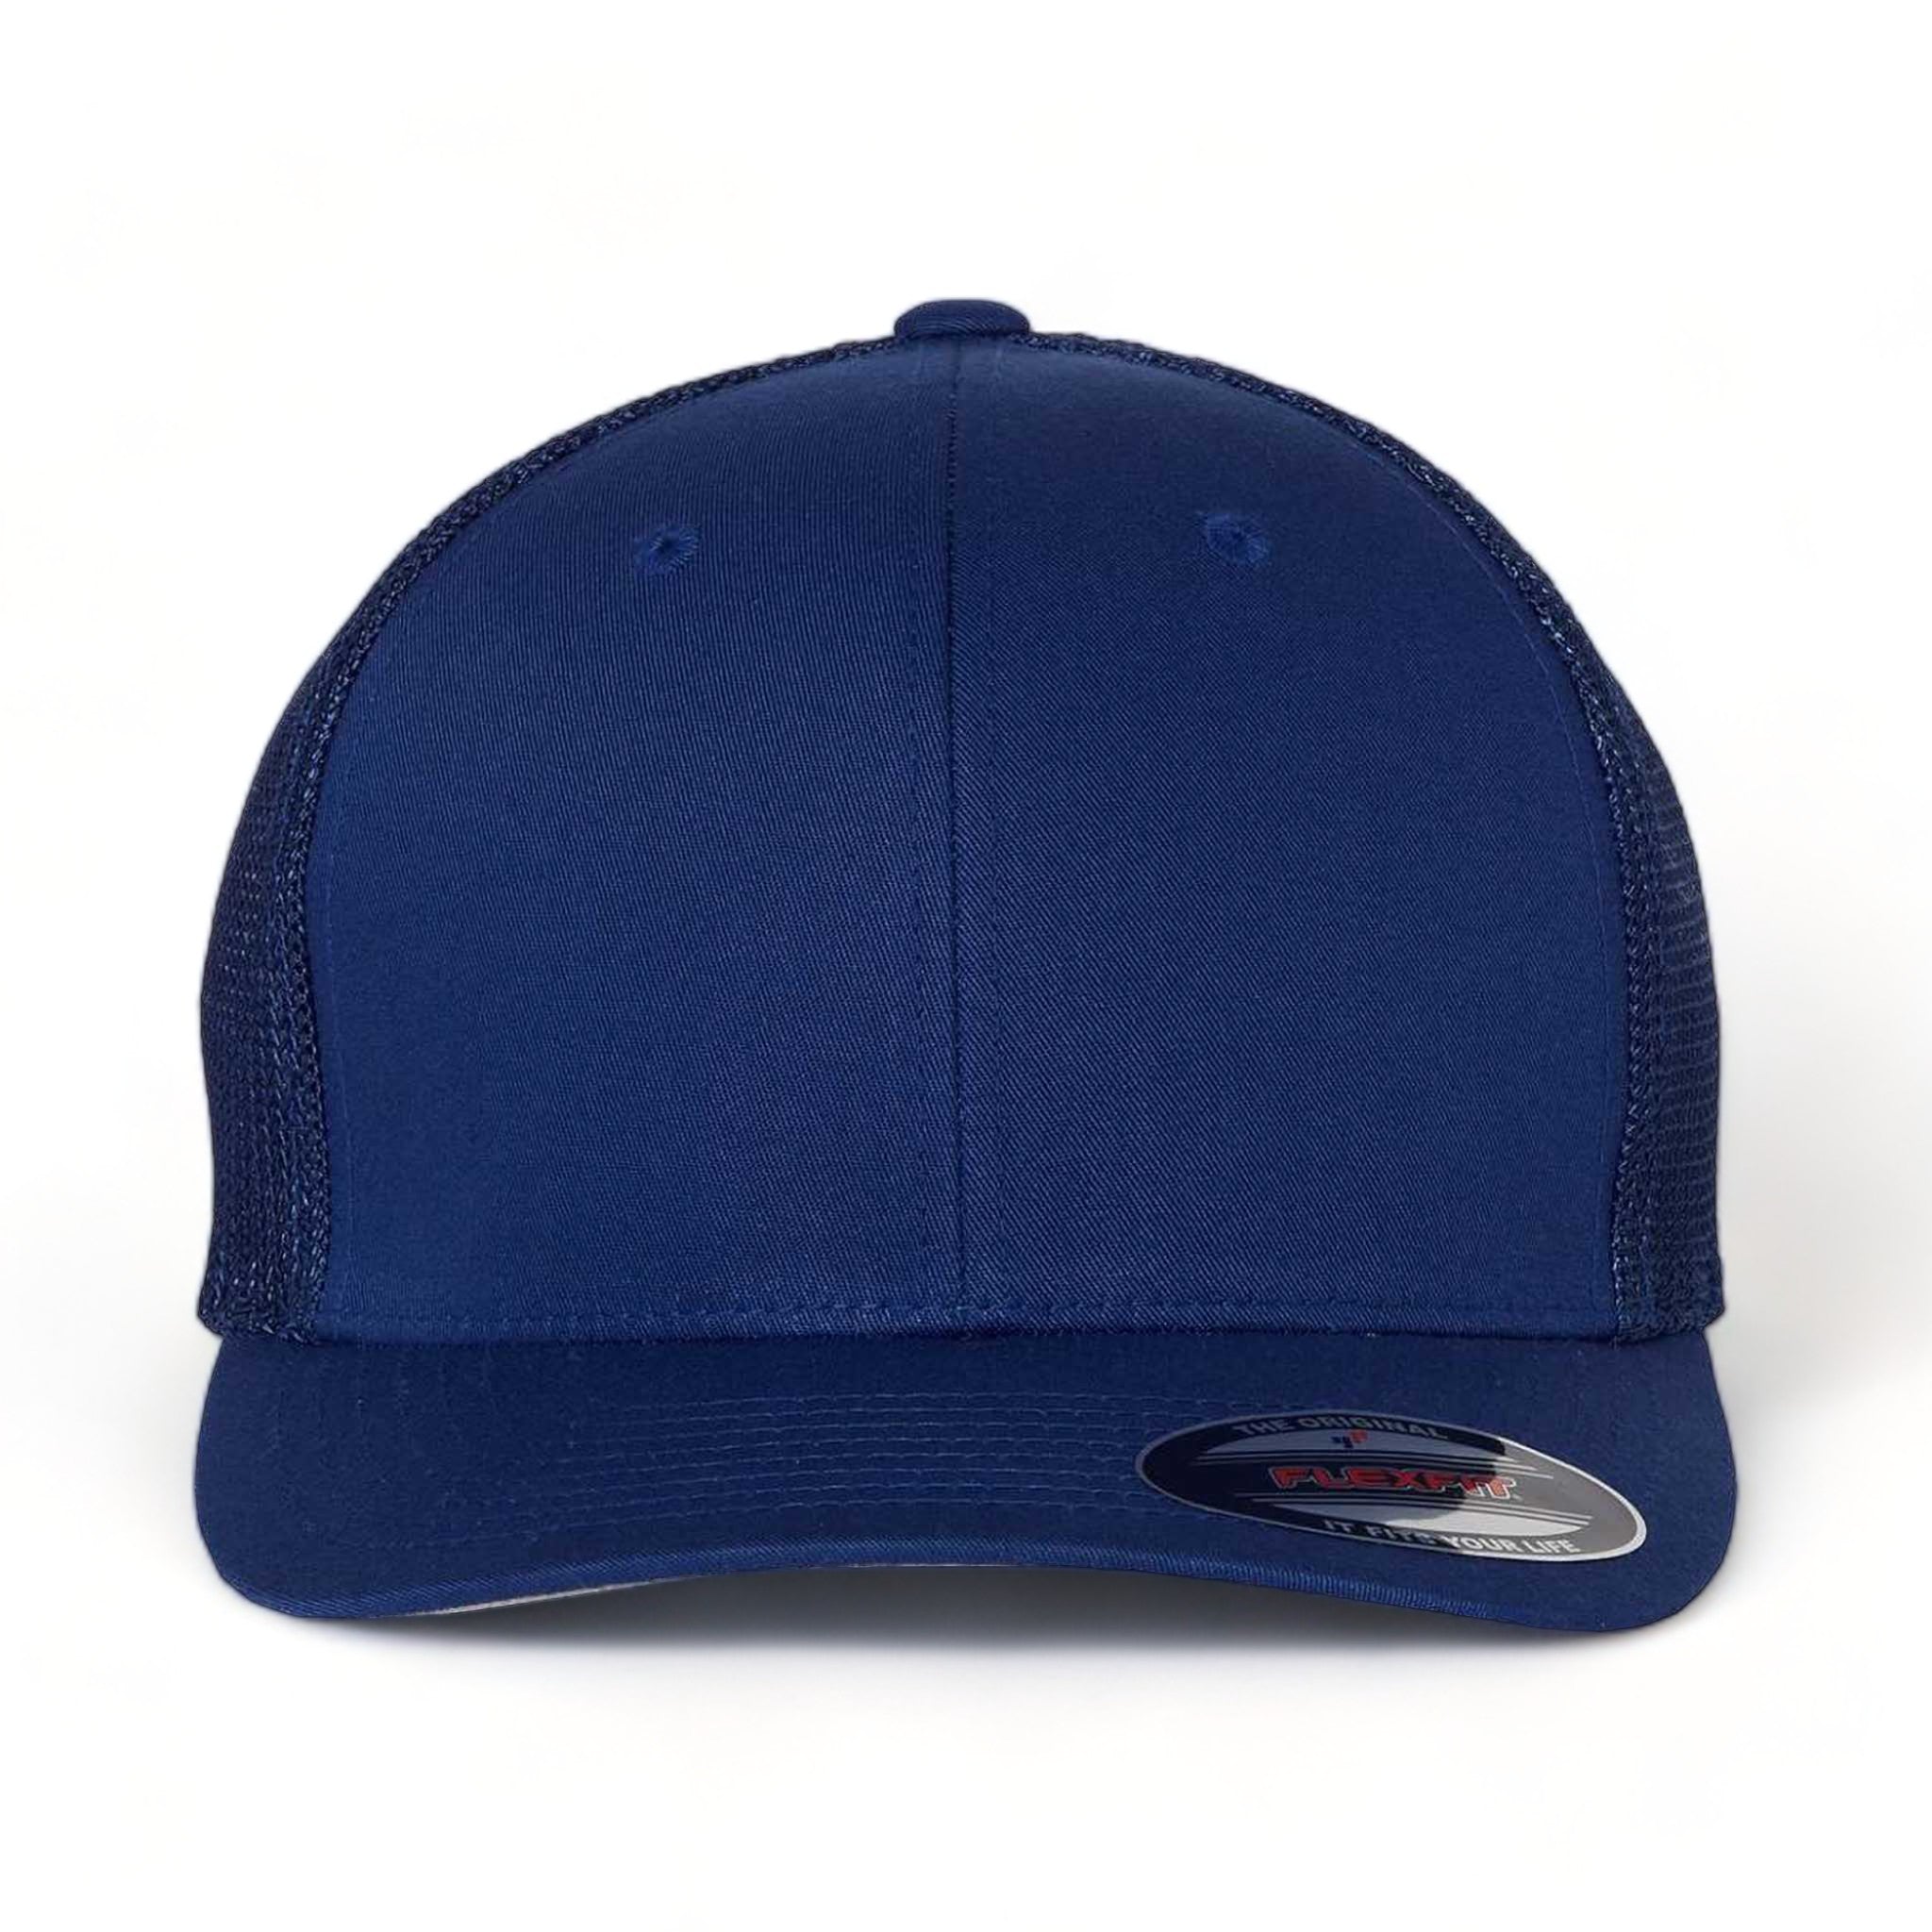 Front view of Flexfit 6511 custom hat in royal and blue